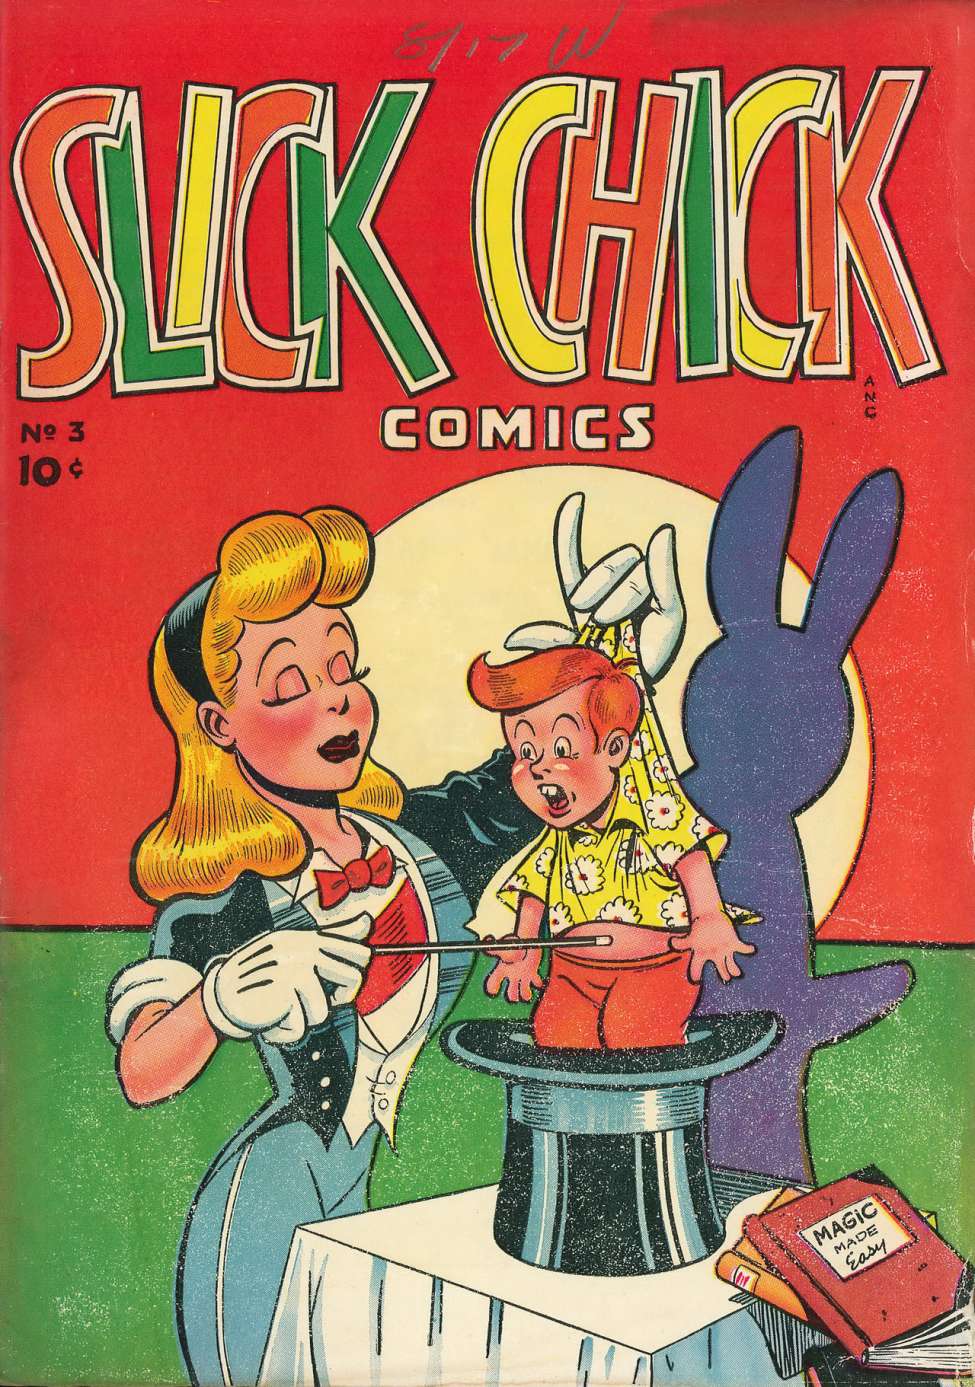 Book Cover For Slick Chick Comics 3